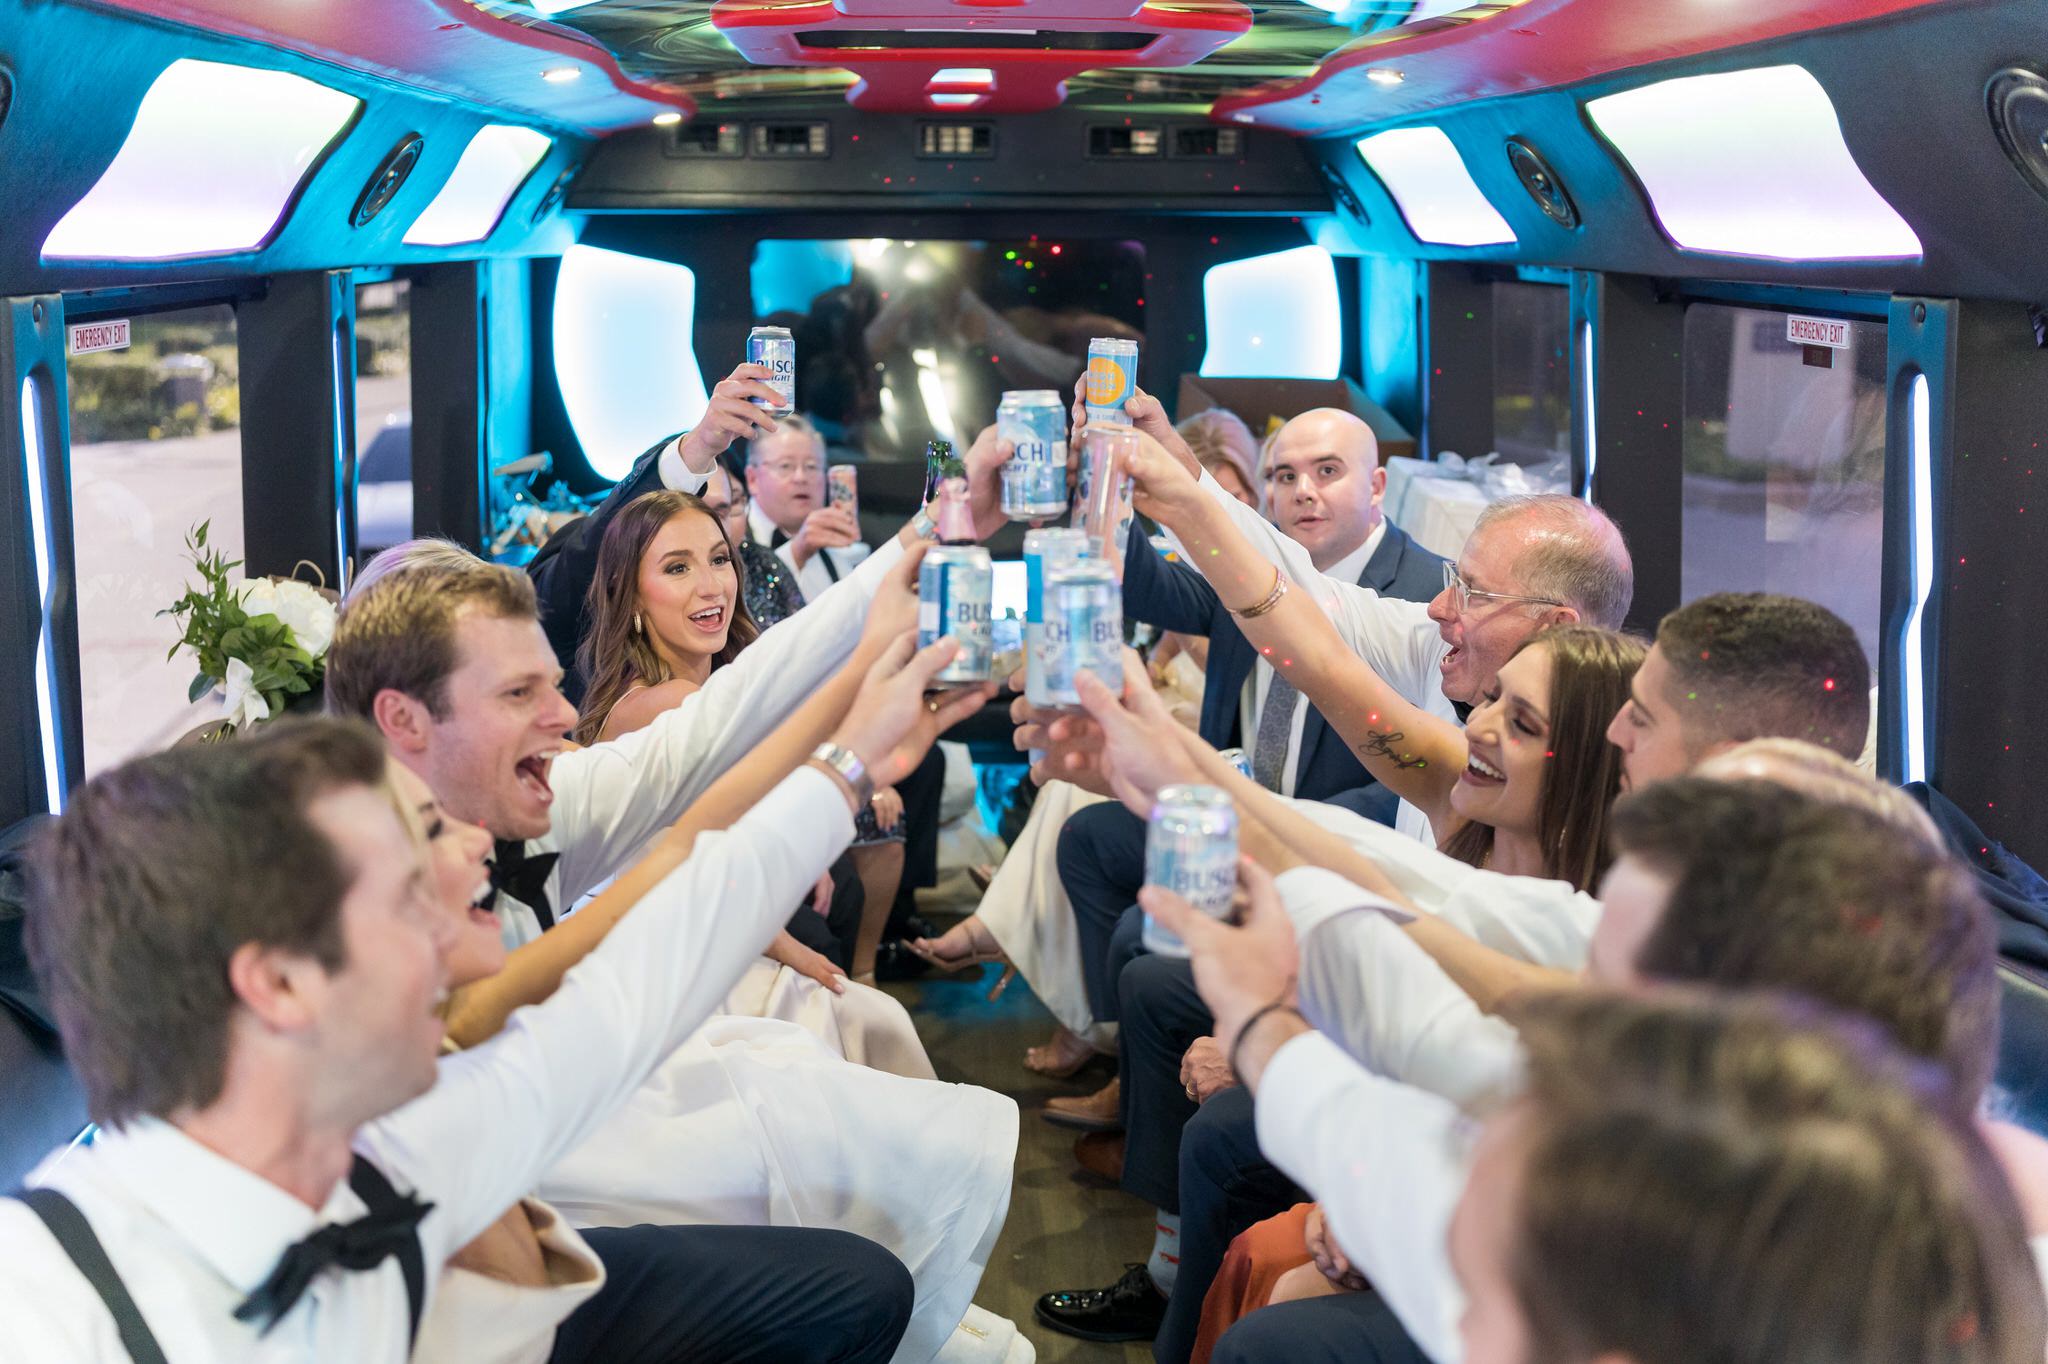 Guests hold Busch Light beer cans and toast in a party bus.